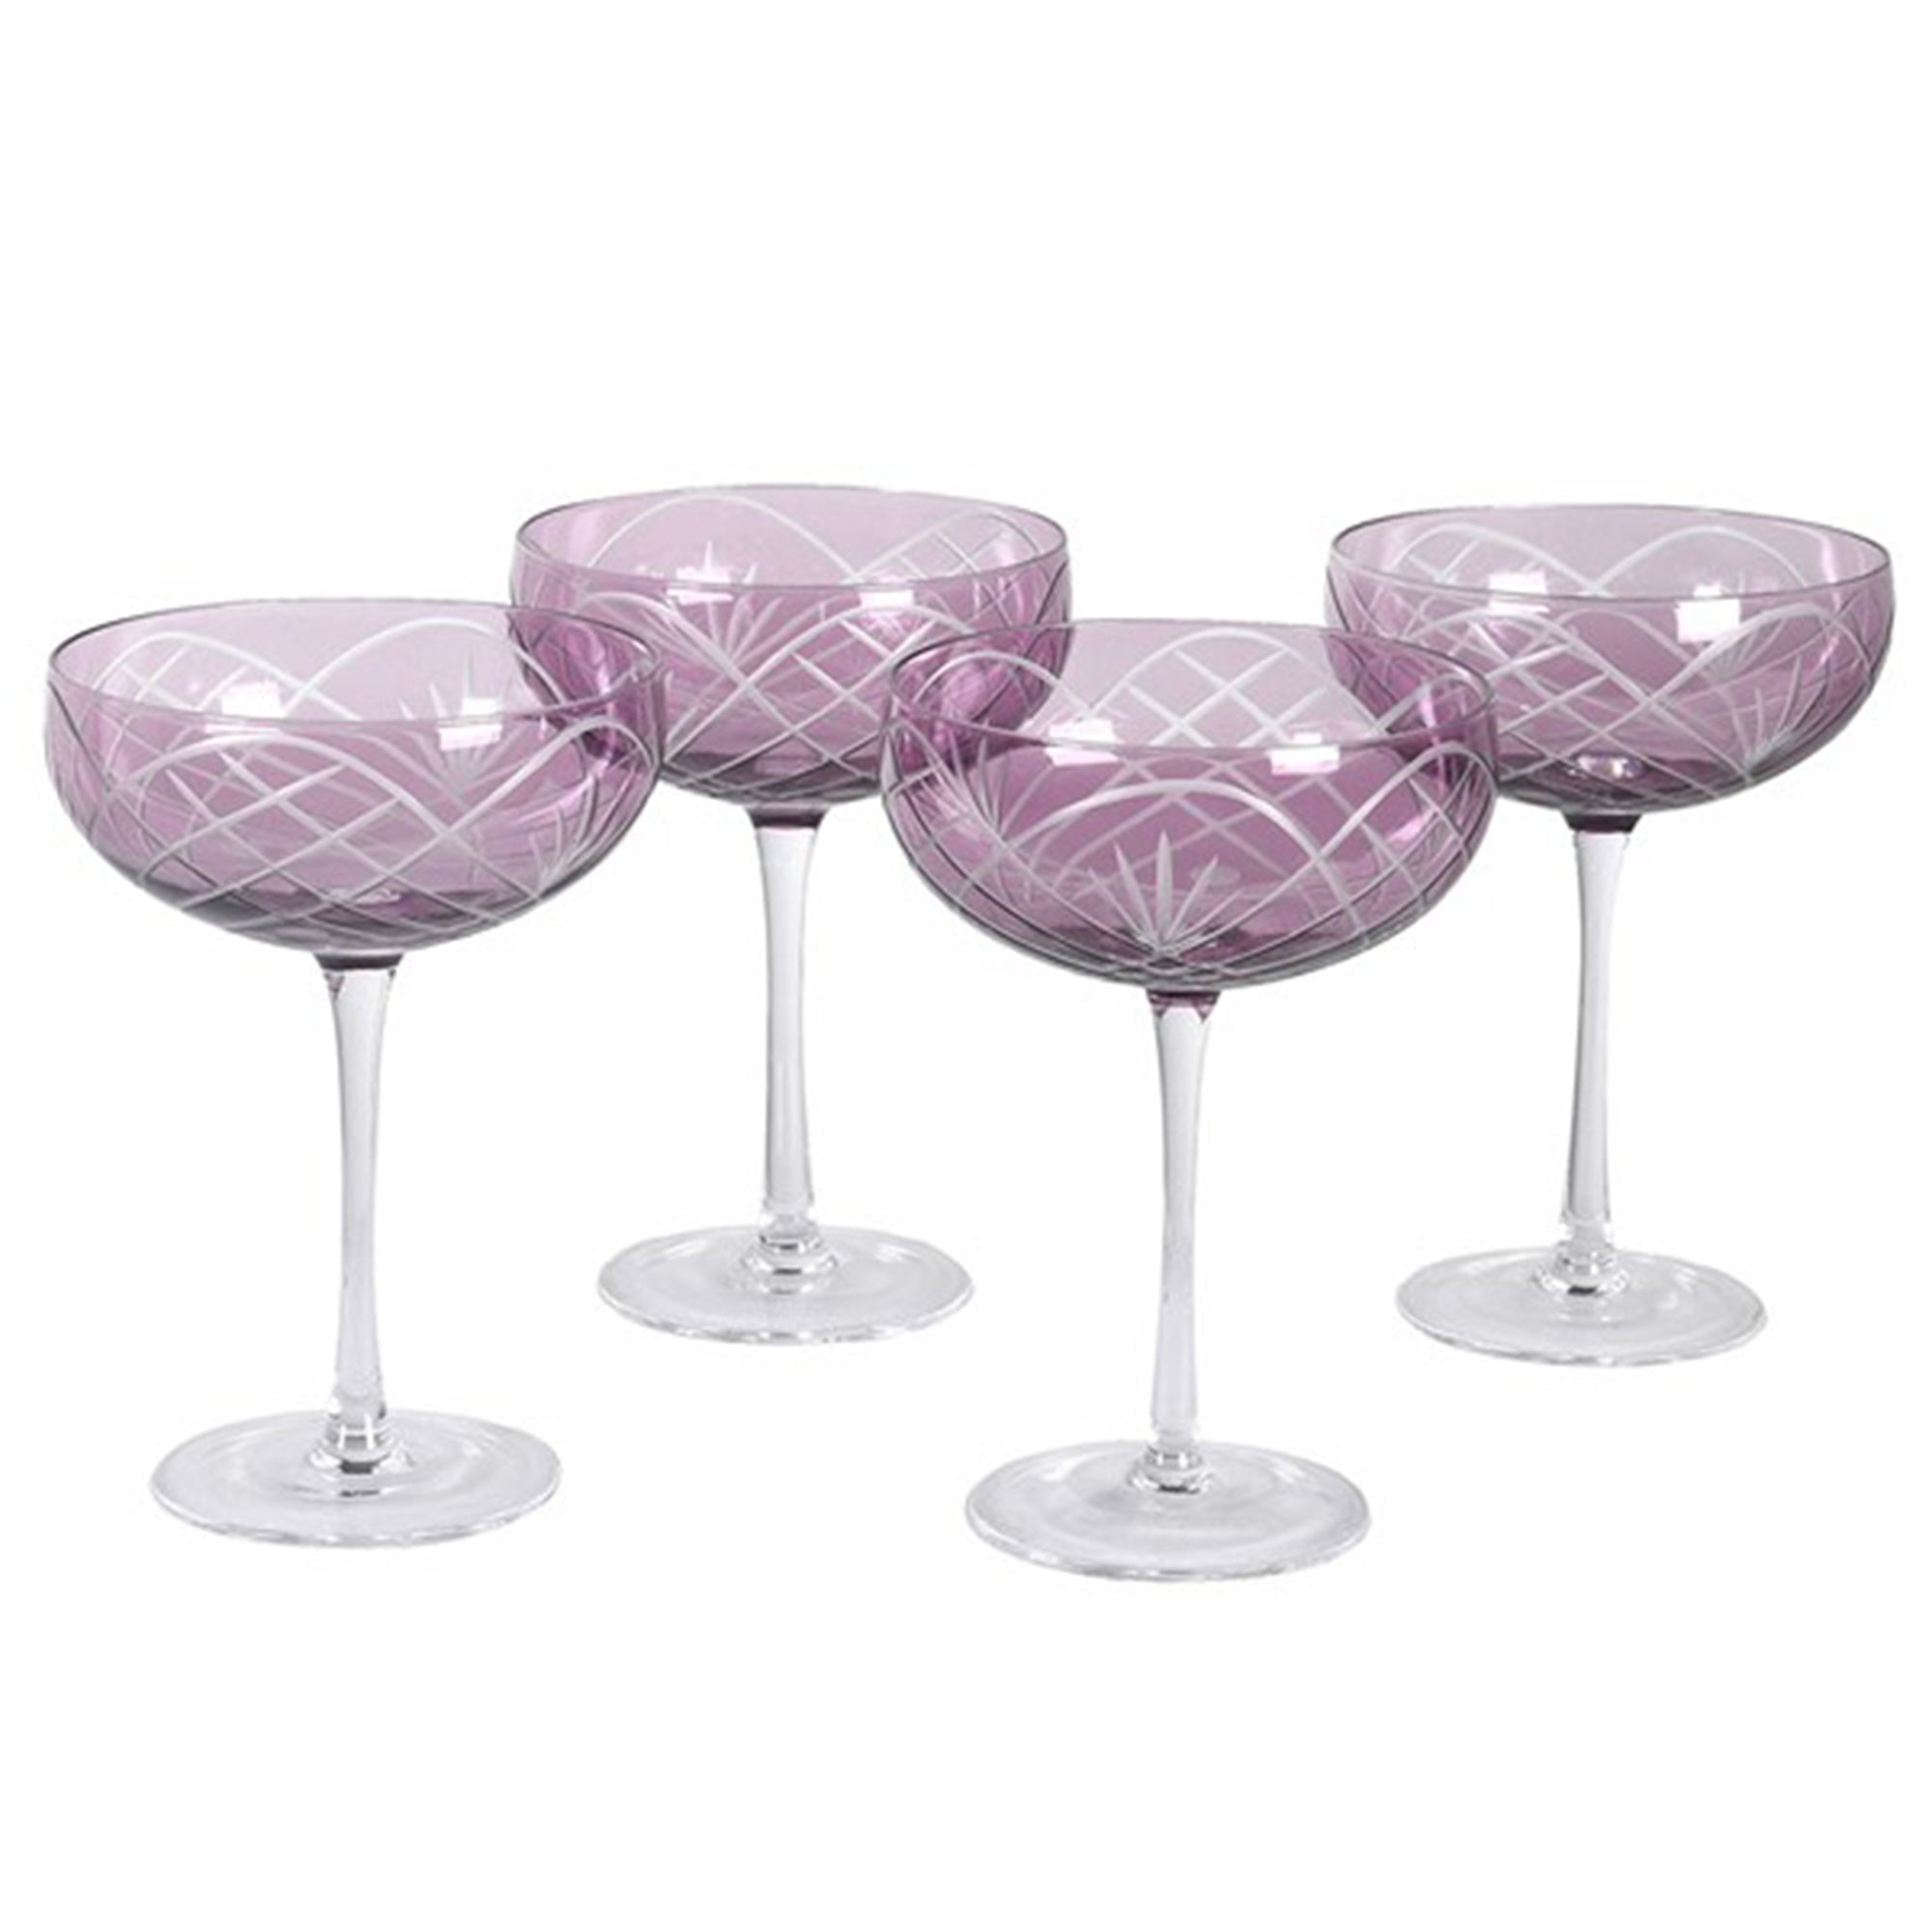 Connaught - Set of 4 Champagne Saucers